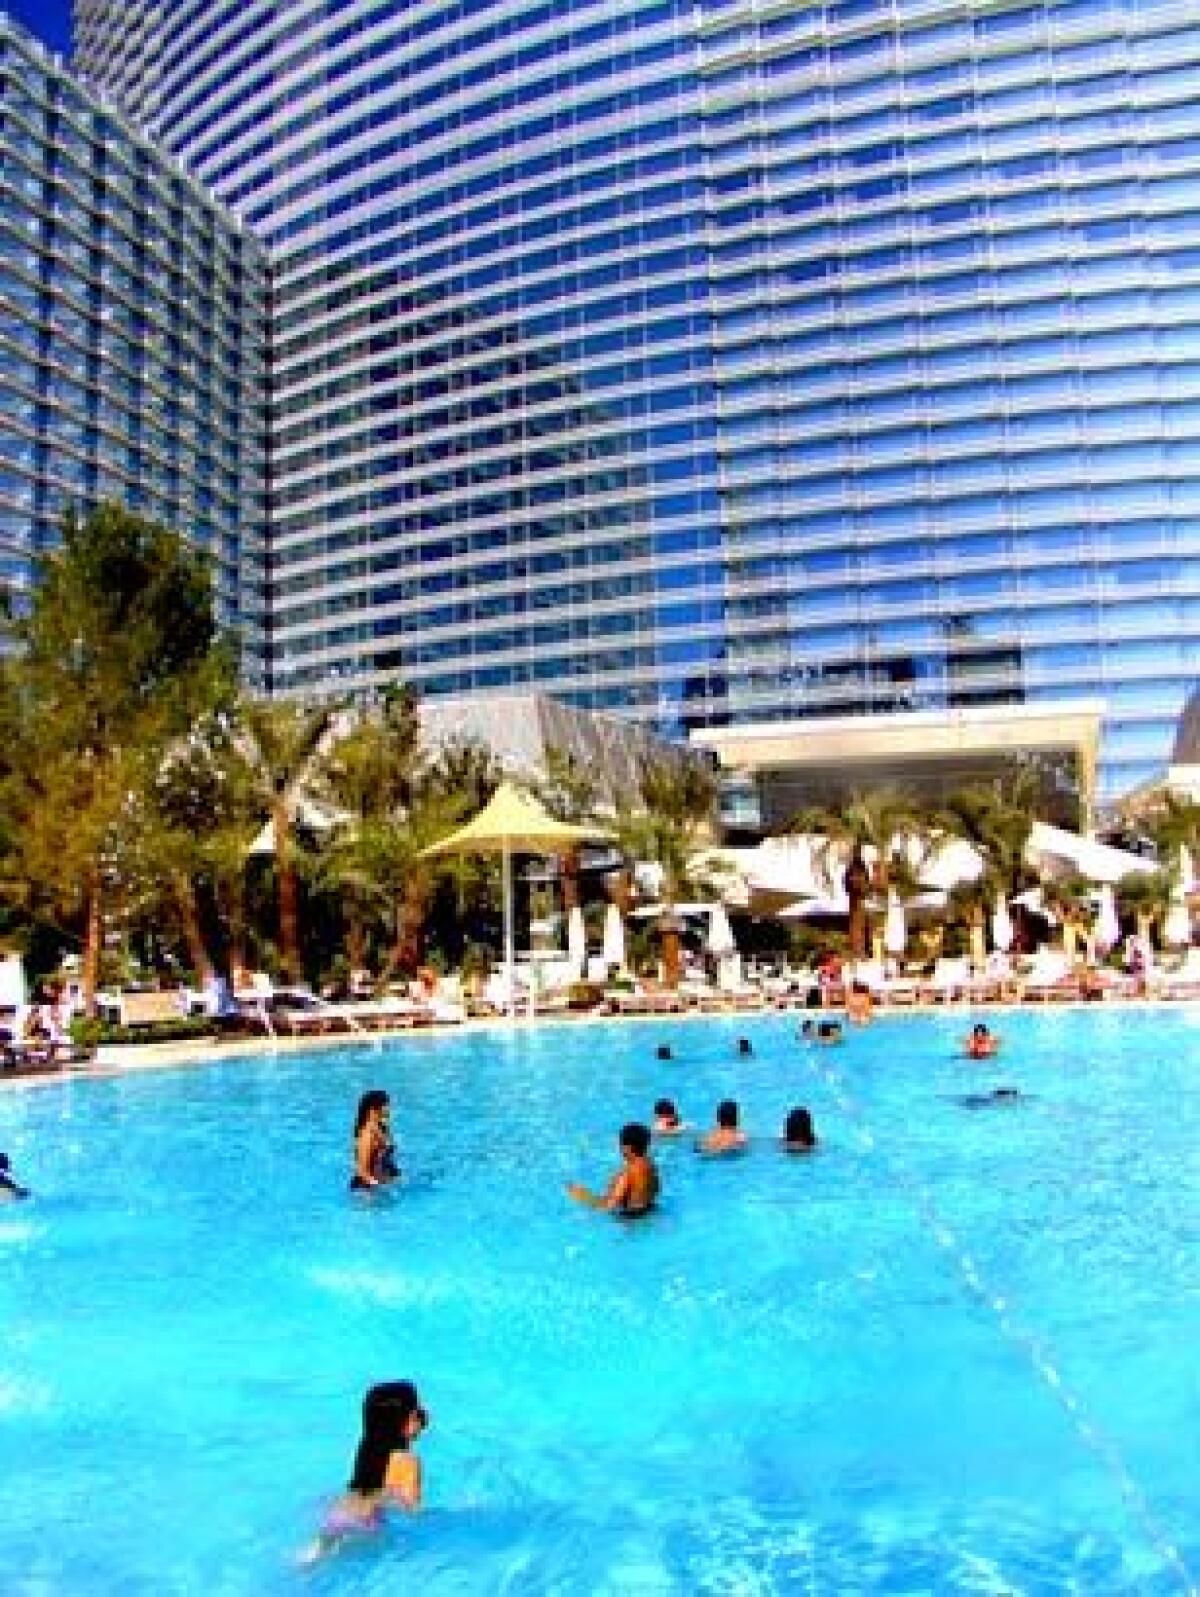 The casinos aren't the only places to play in Las Vegas. The towers of Aria loom large over one of the hotel's pools.